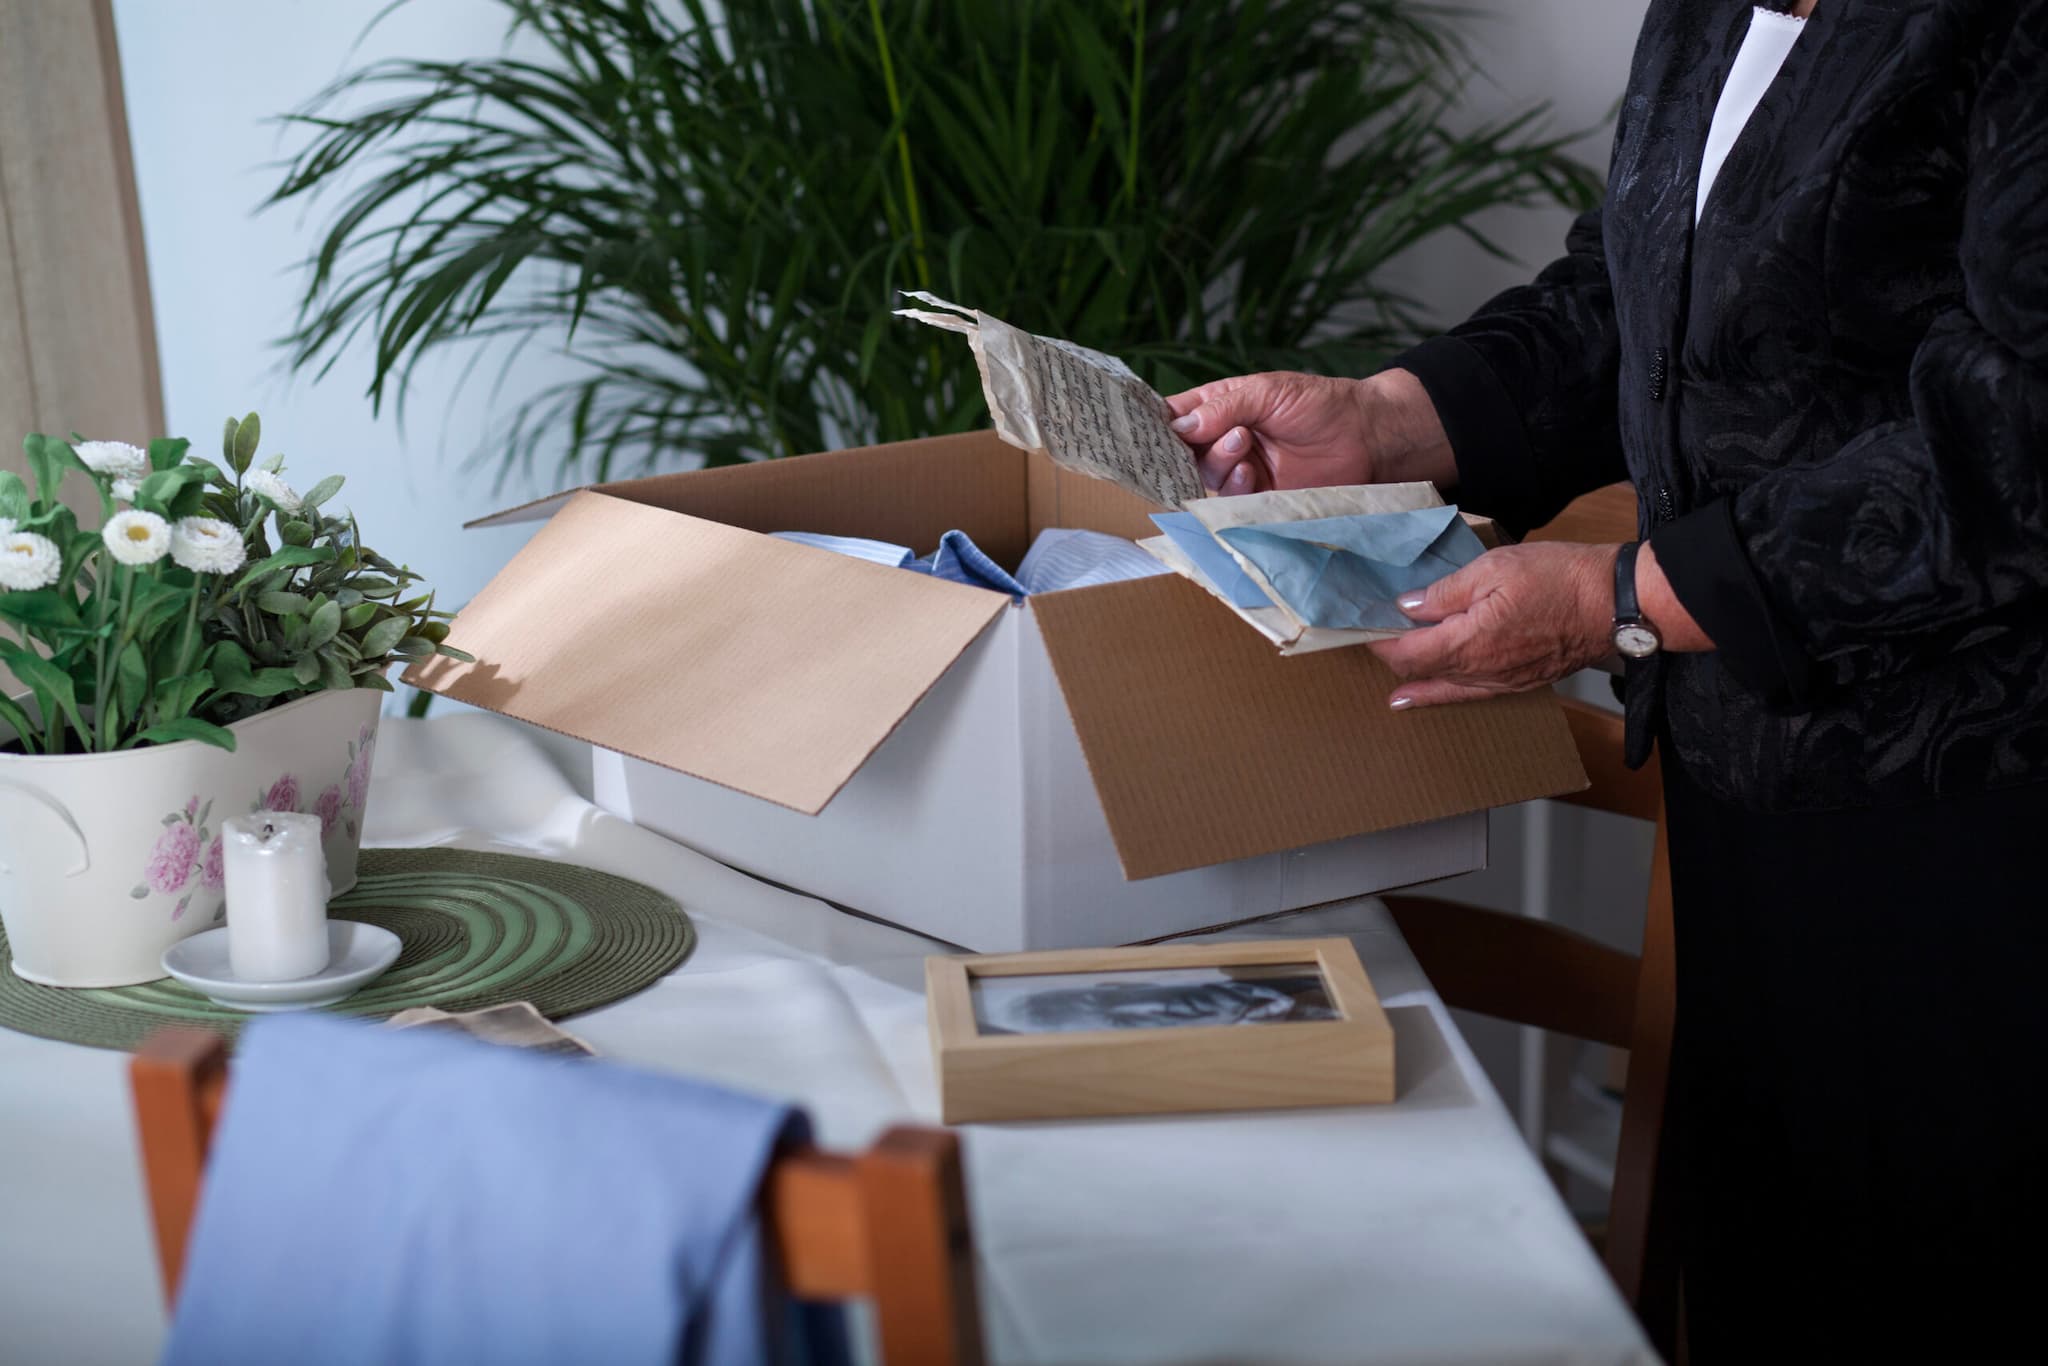 A person packing a box of papers